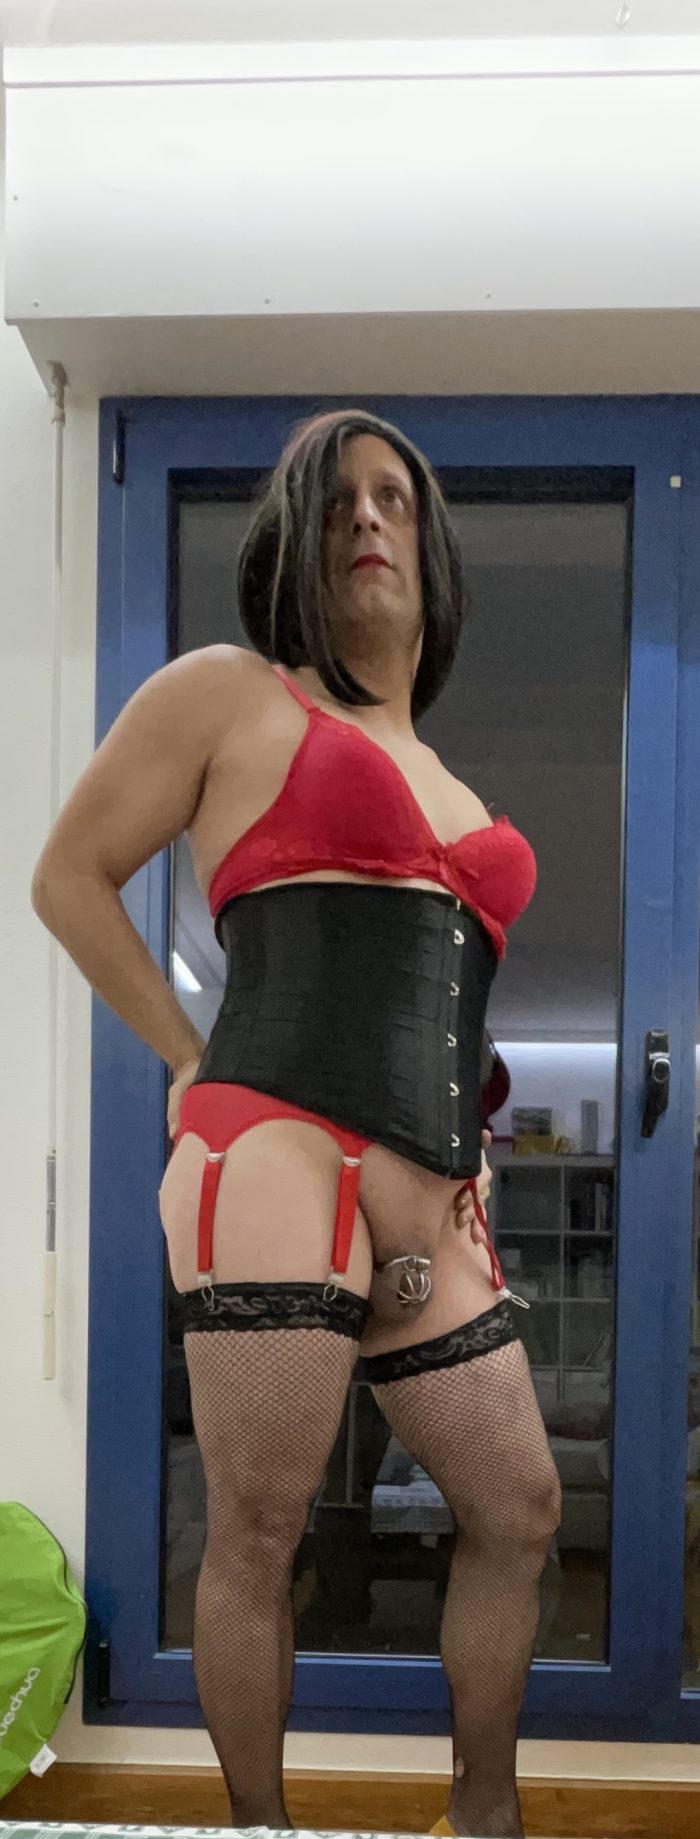 Daniel Rico, sissy in red from Pamplona. Lives to be exposed and humiliated